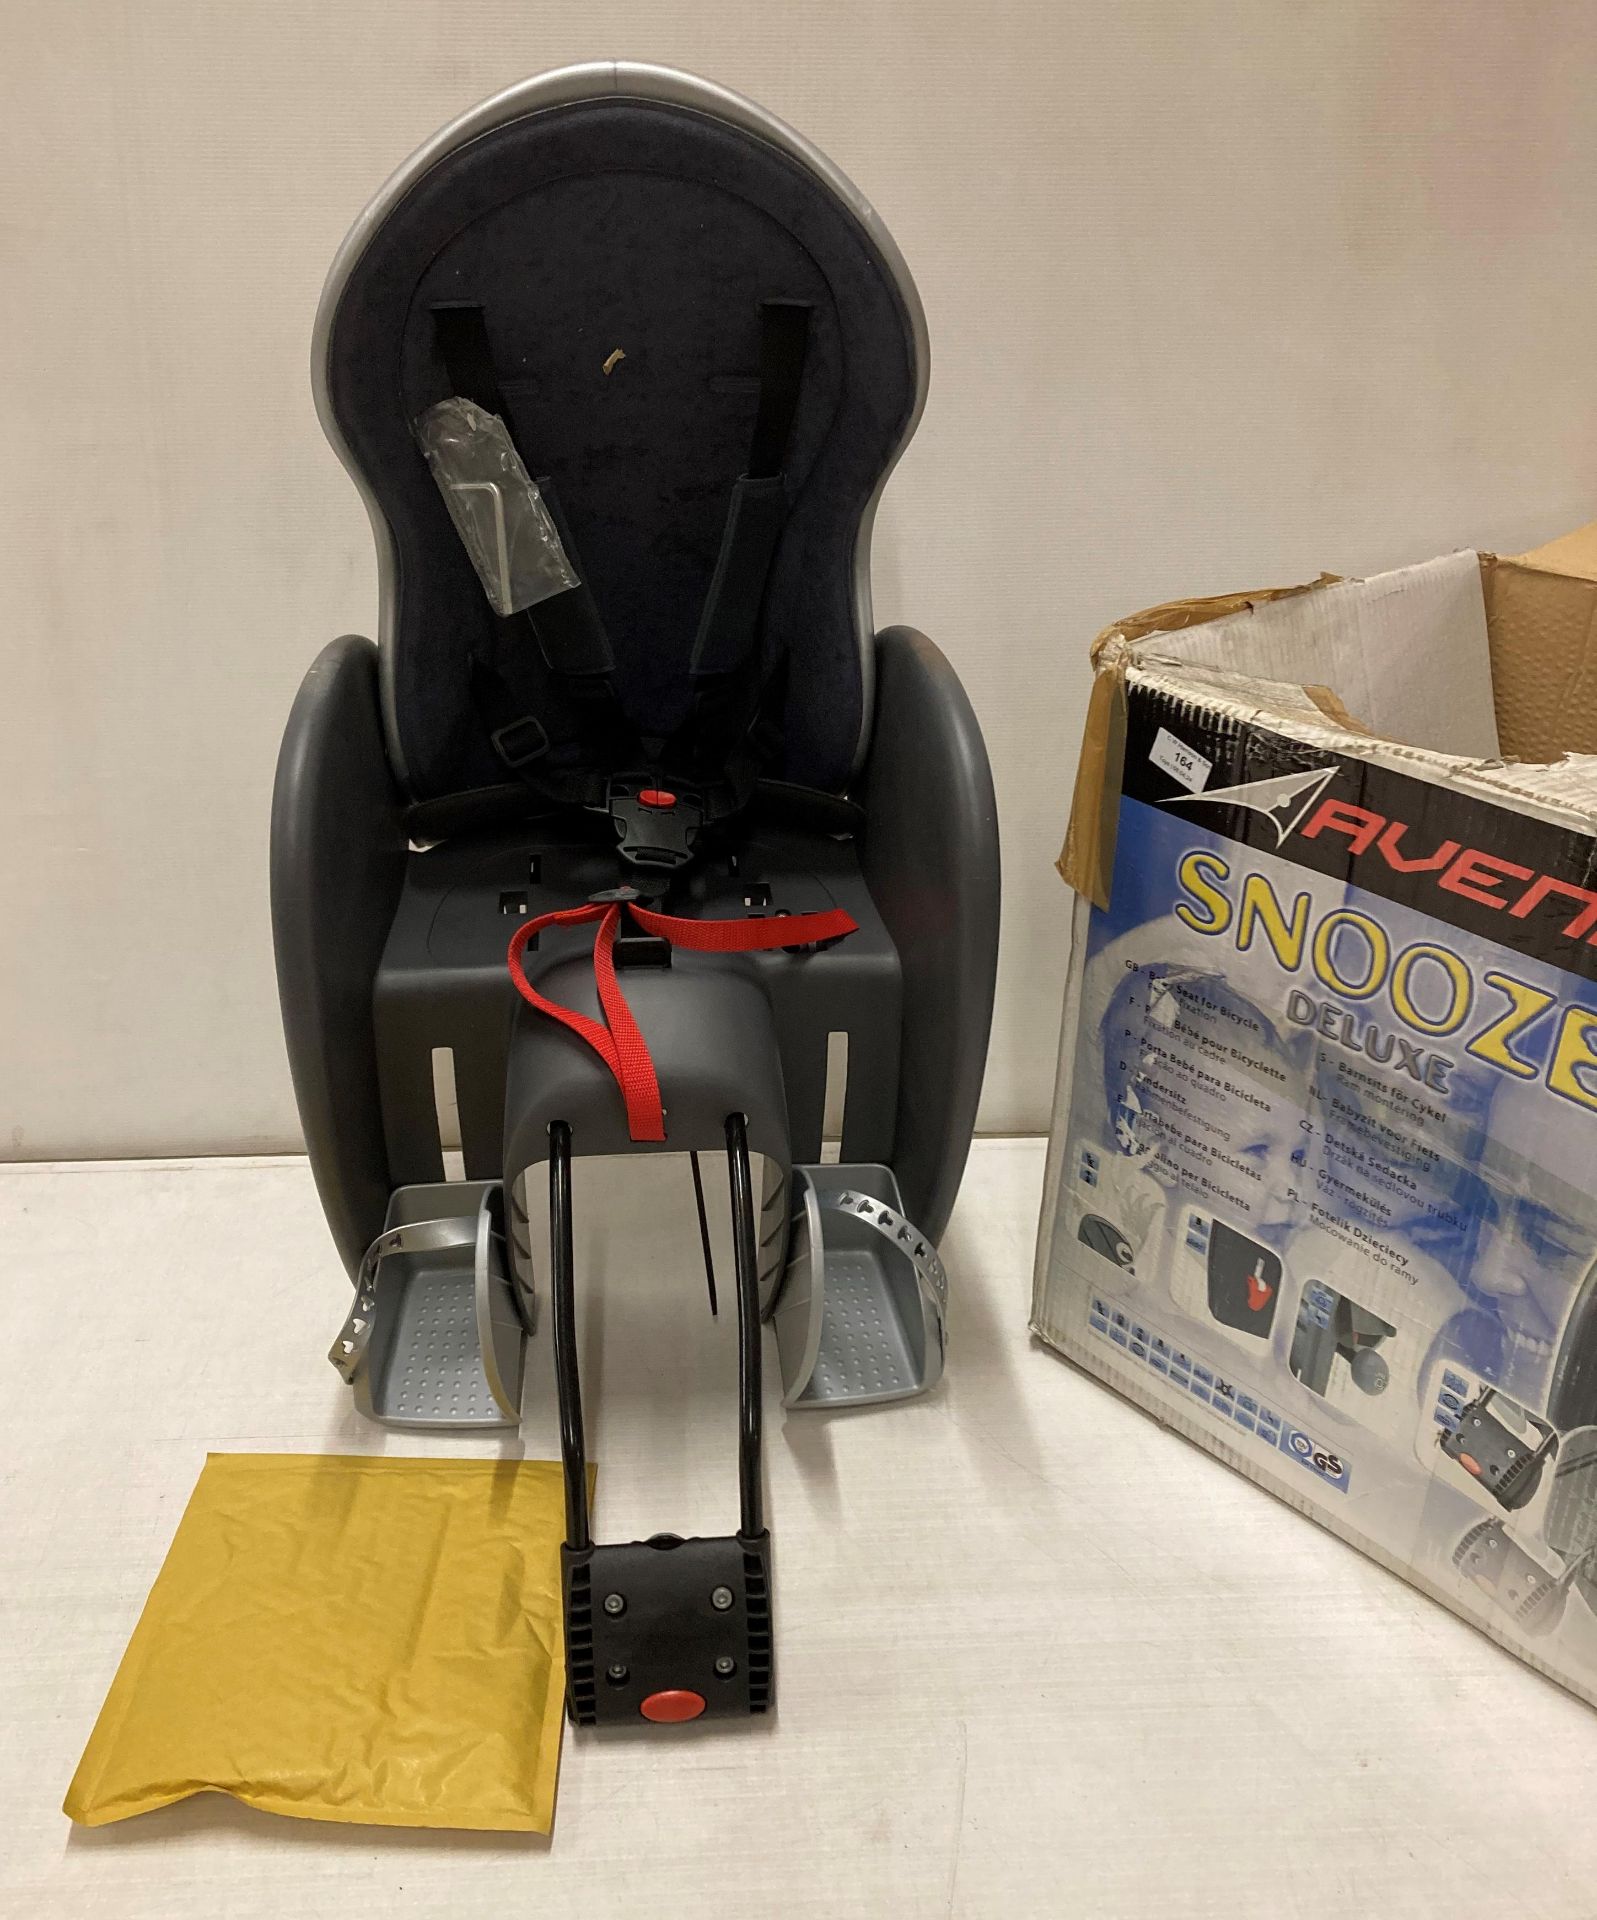 Avenir Snooze Deluxe child's safety bicycle seat (saleroom location: L06)